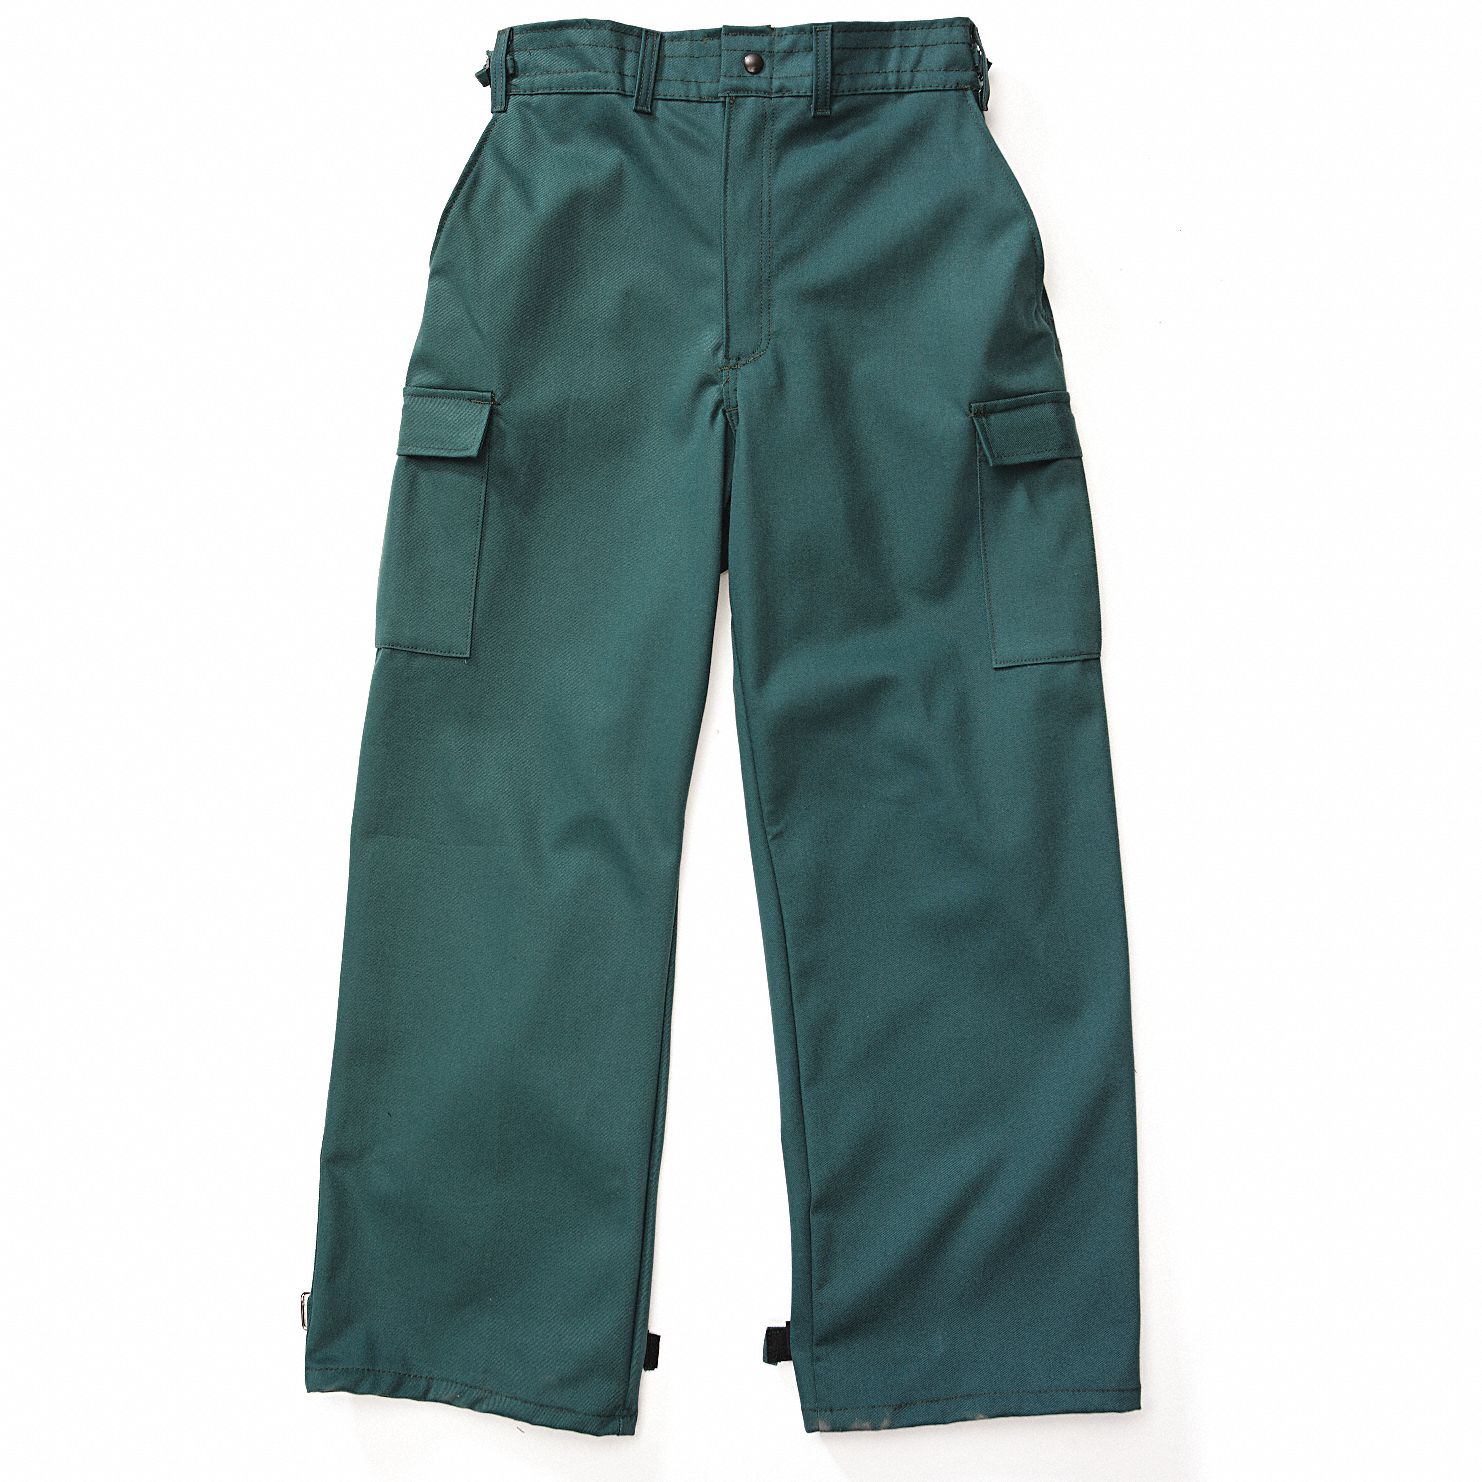 7 oz Flame Resistant Fabric and Nomex Thread Wildland Fire Pants, Green, 30 in Inseam, Fits Waist Si